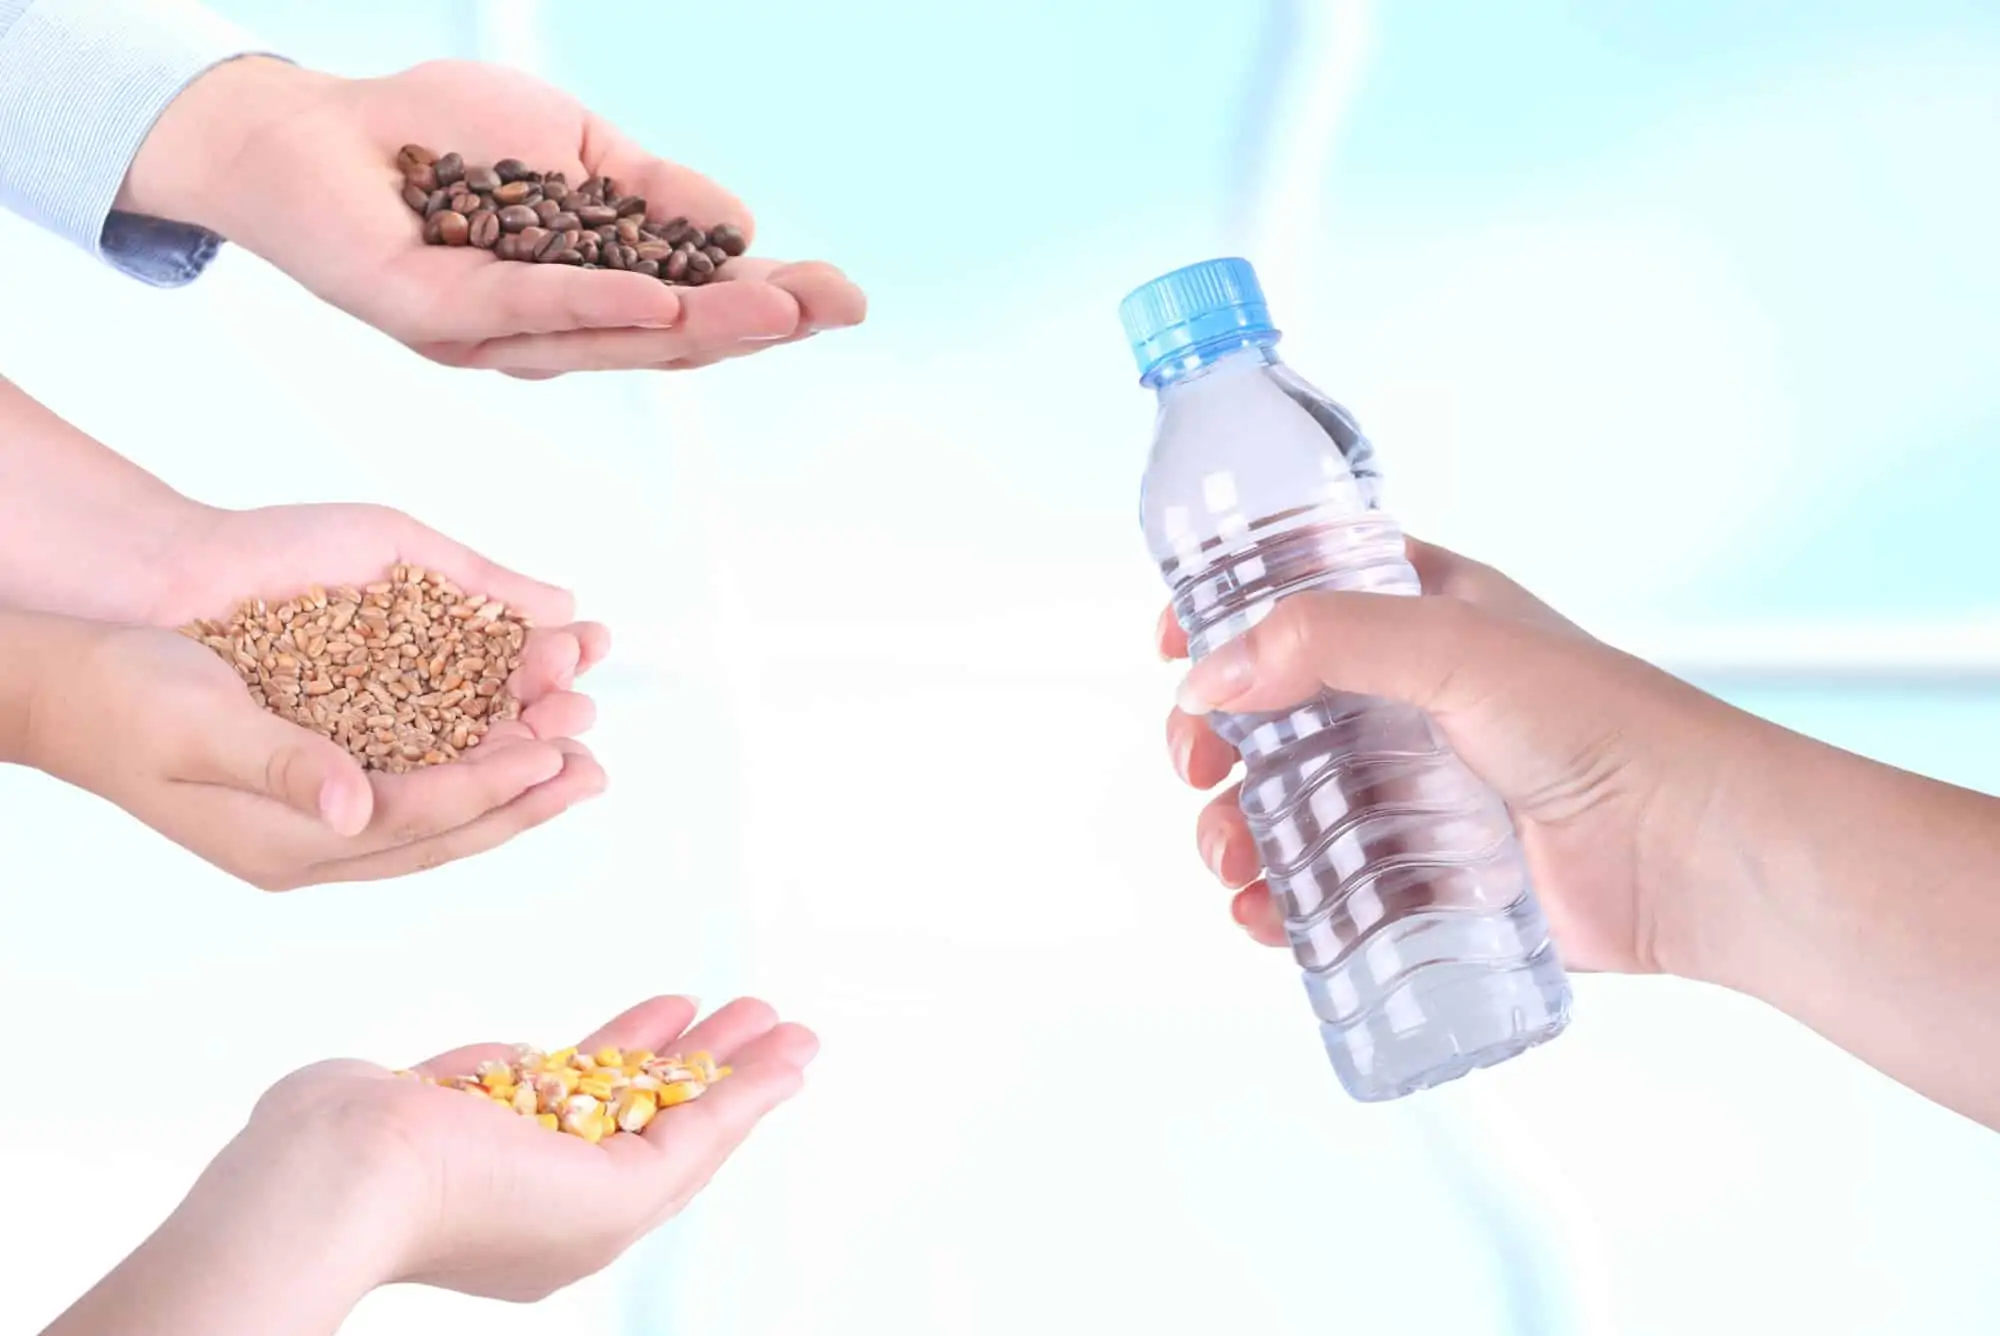 People's hands offering to barter corn, grains and coffee for bottled water in a barter network.